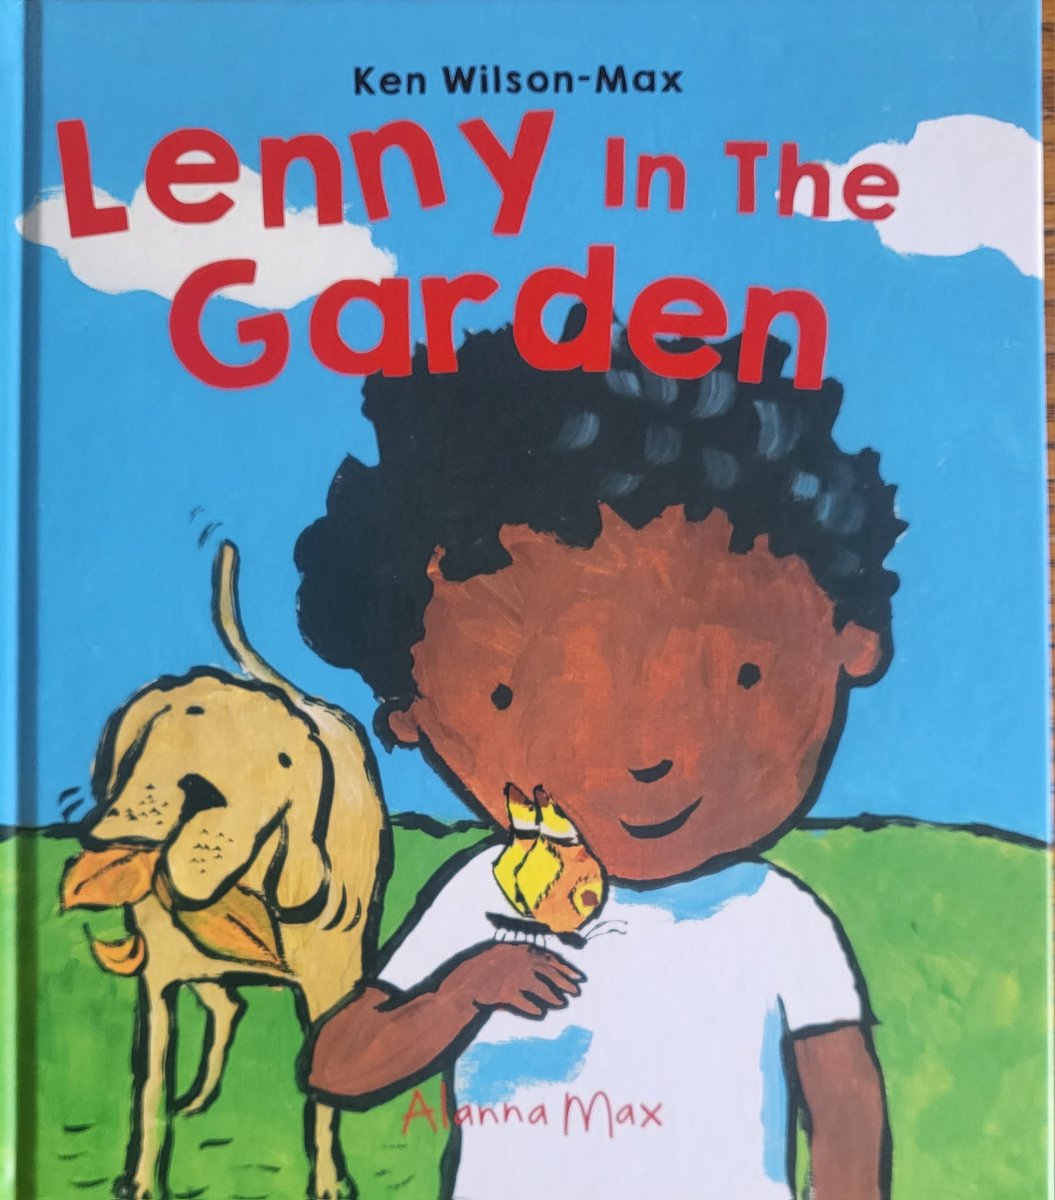 Picture book delight @kenwilsonmax @AlannaMaxBooks offers a treasure trove of benefits for young children: Lenny's adventures highlight the wonders of the garden. Spending time in nature boosts creativity, & encourages exploration in young children childmind.org/article/why-ki… (1/3)